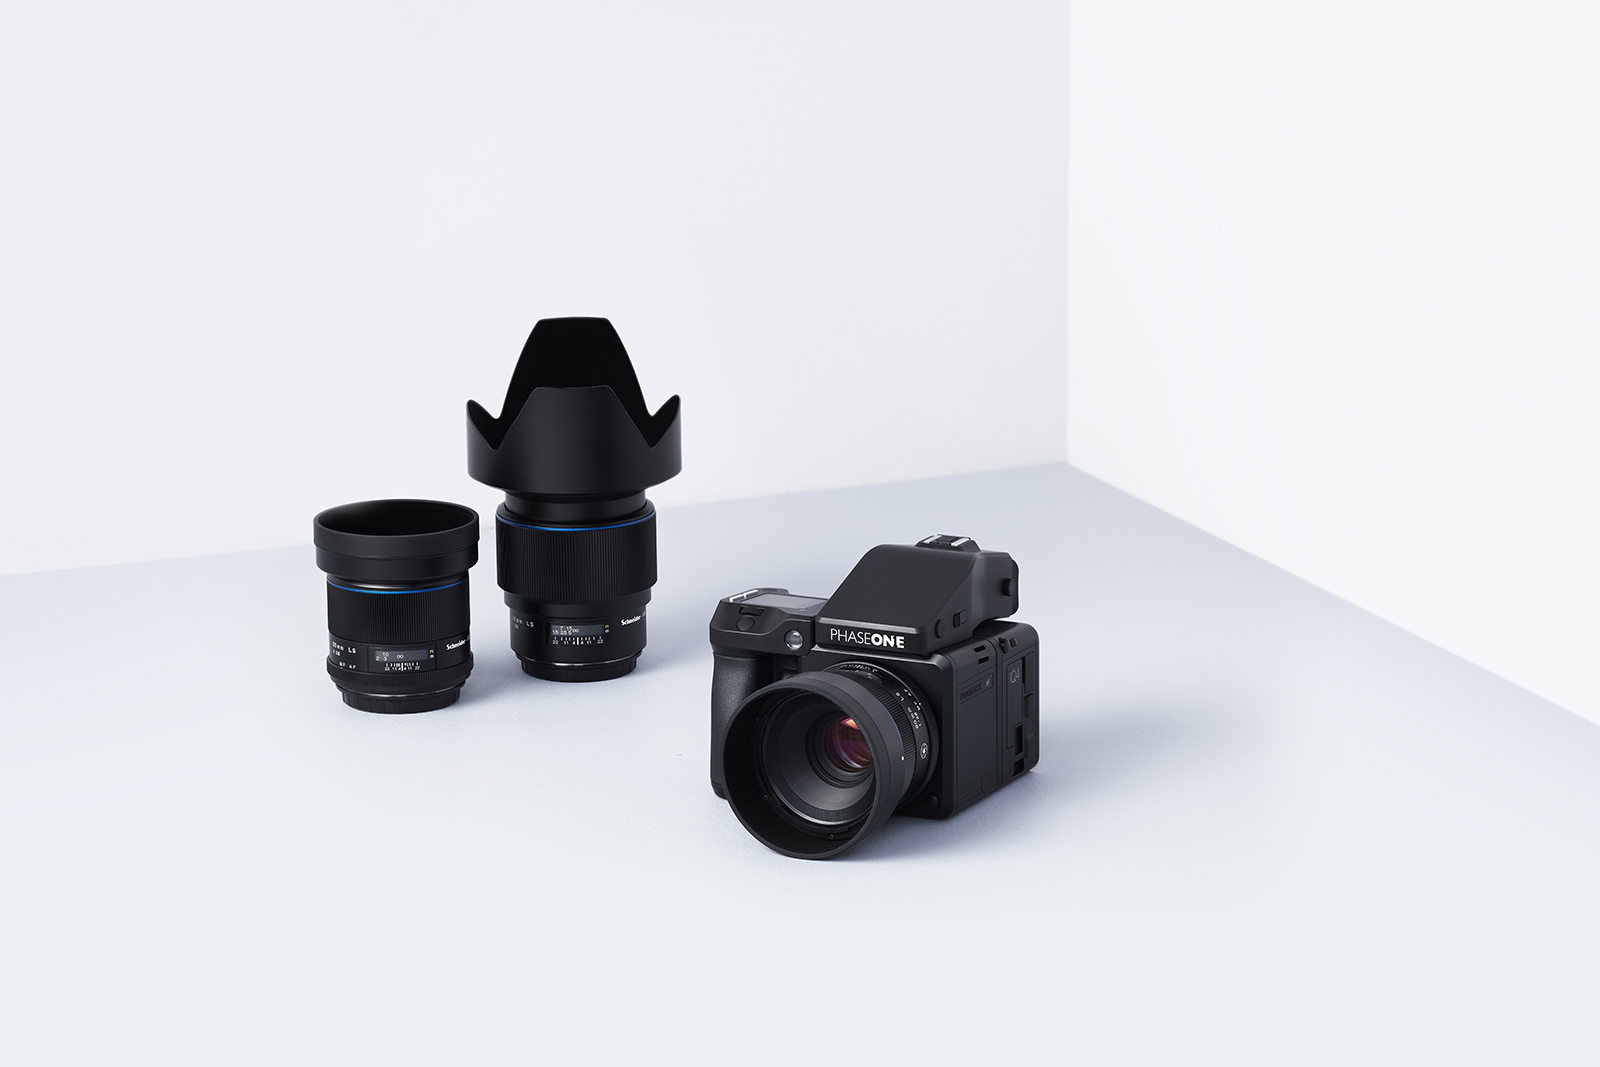 phase one infinity xf announced iq4 150mp camera system example kit